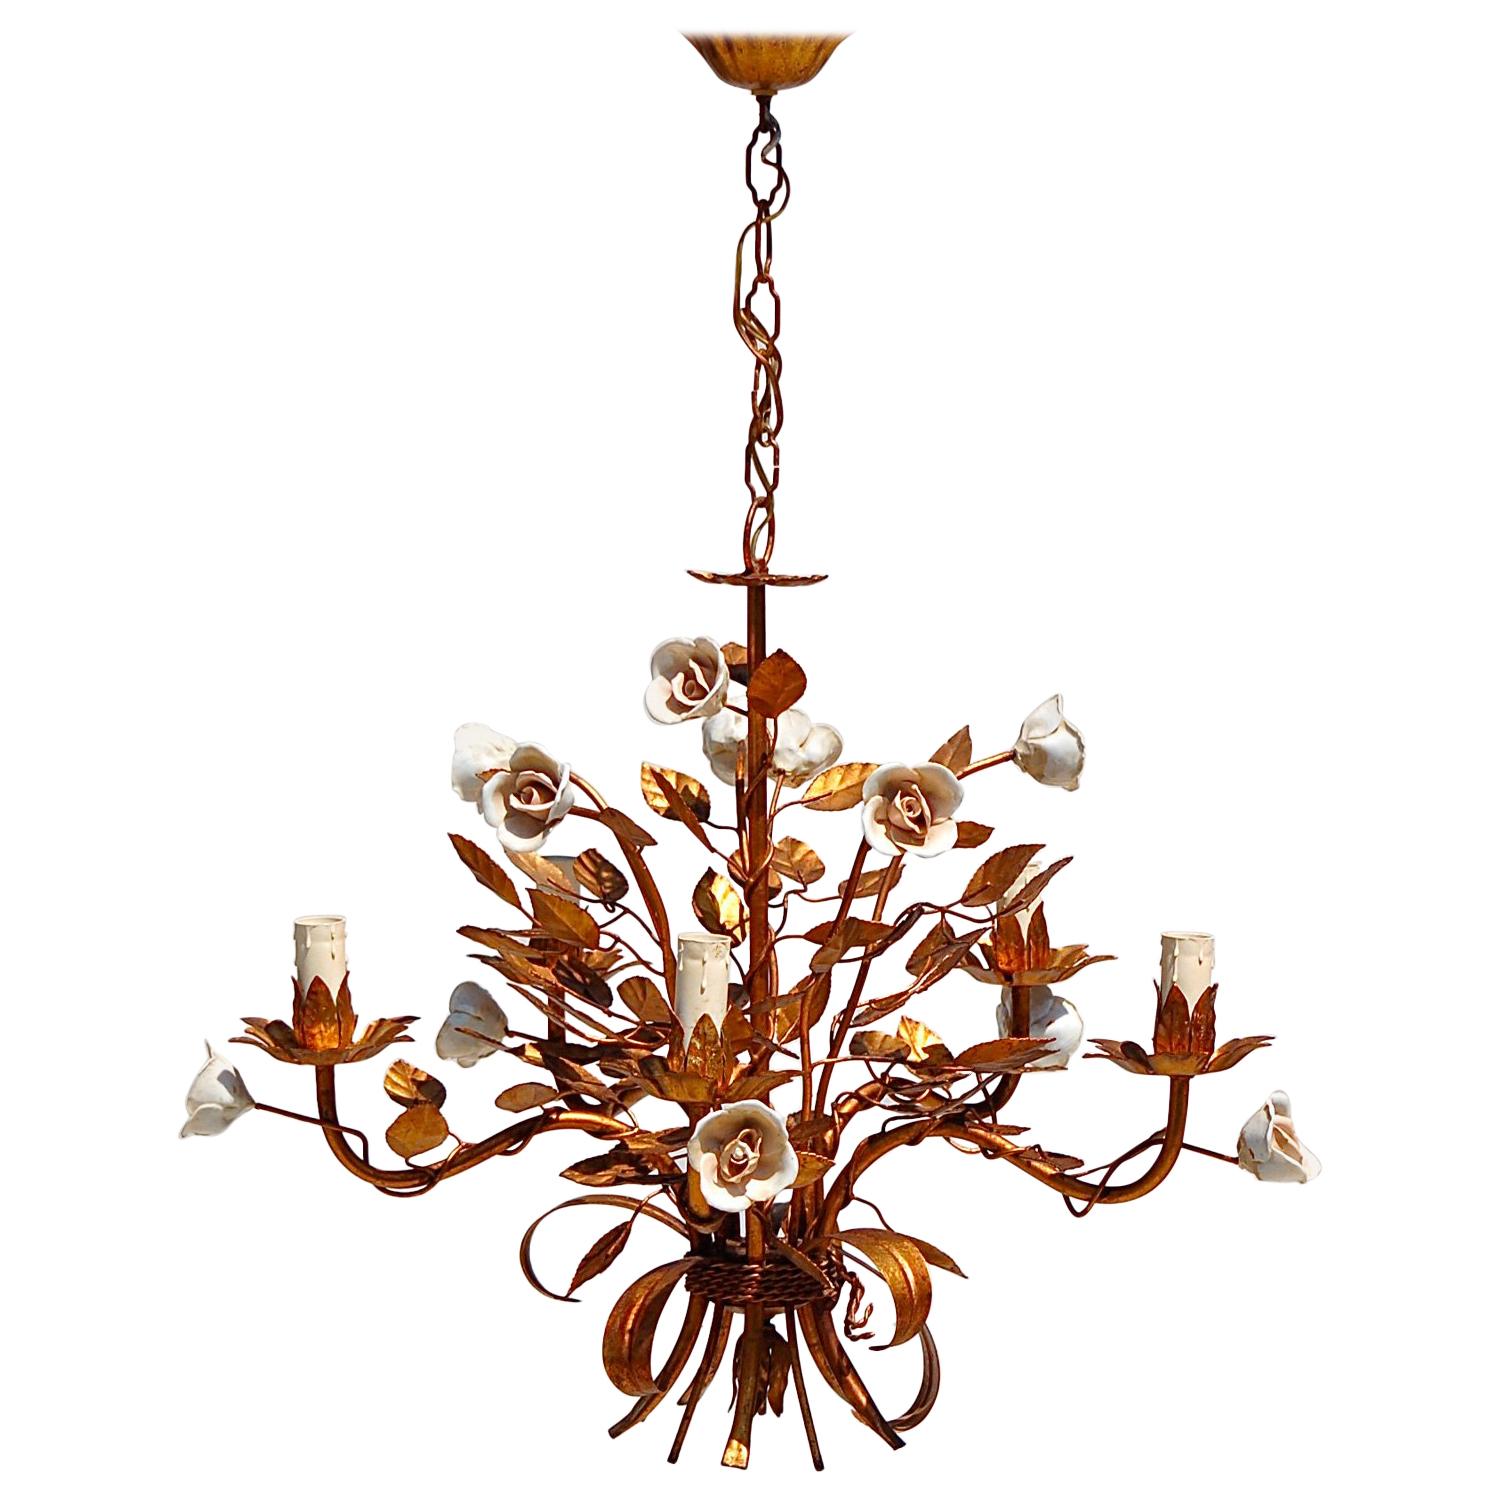 Rose Tole Chandelier with Gold Finish, 1950s, Italy